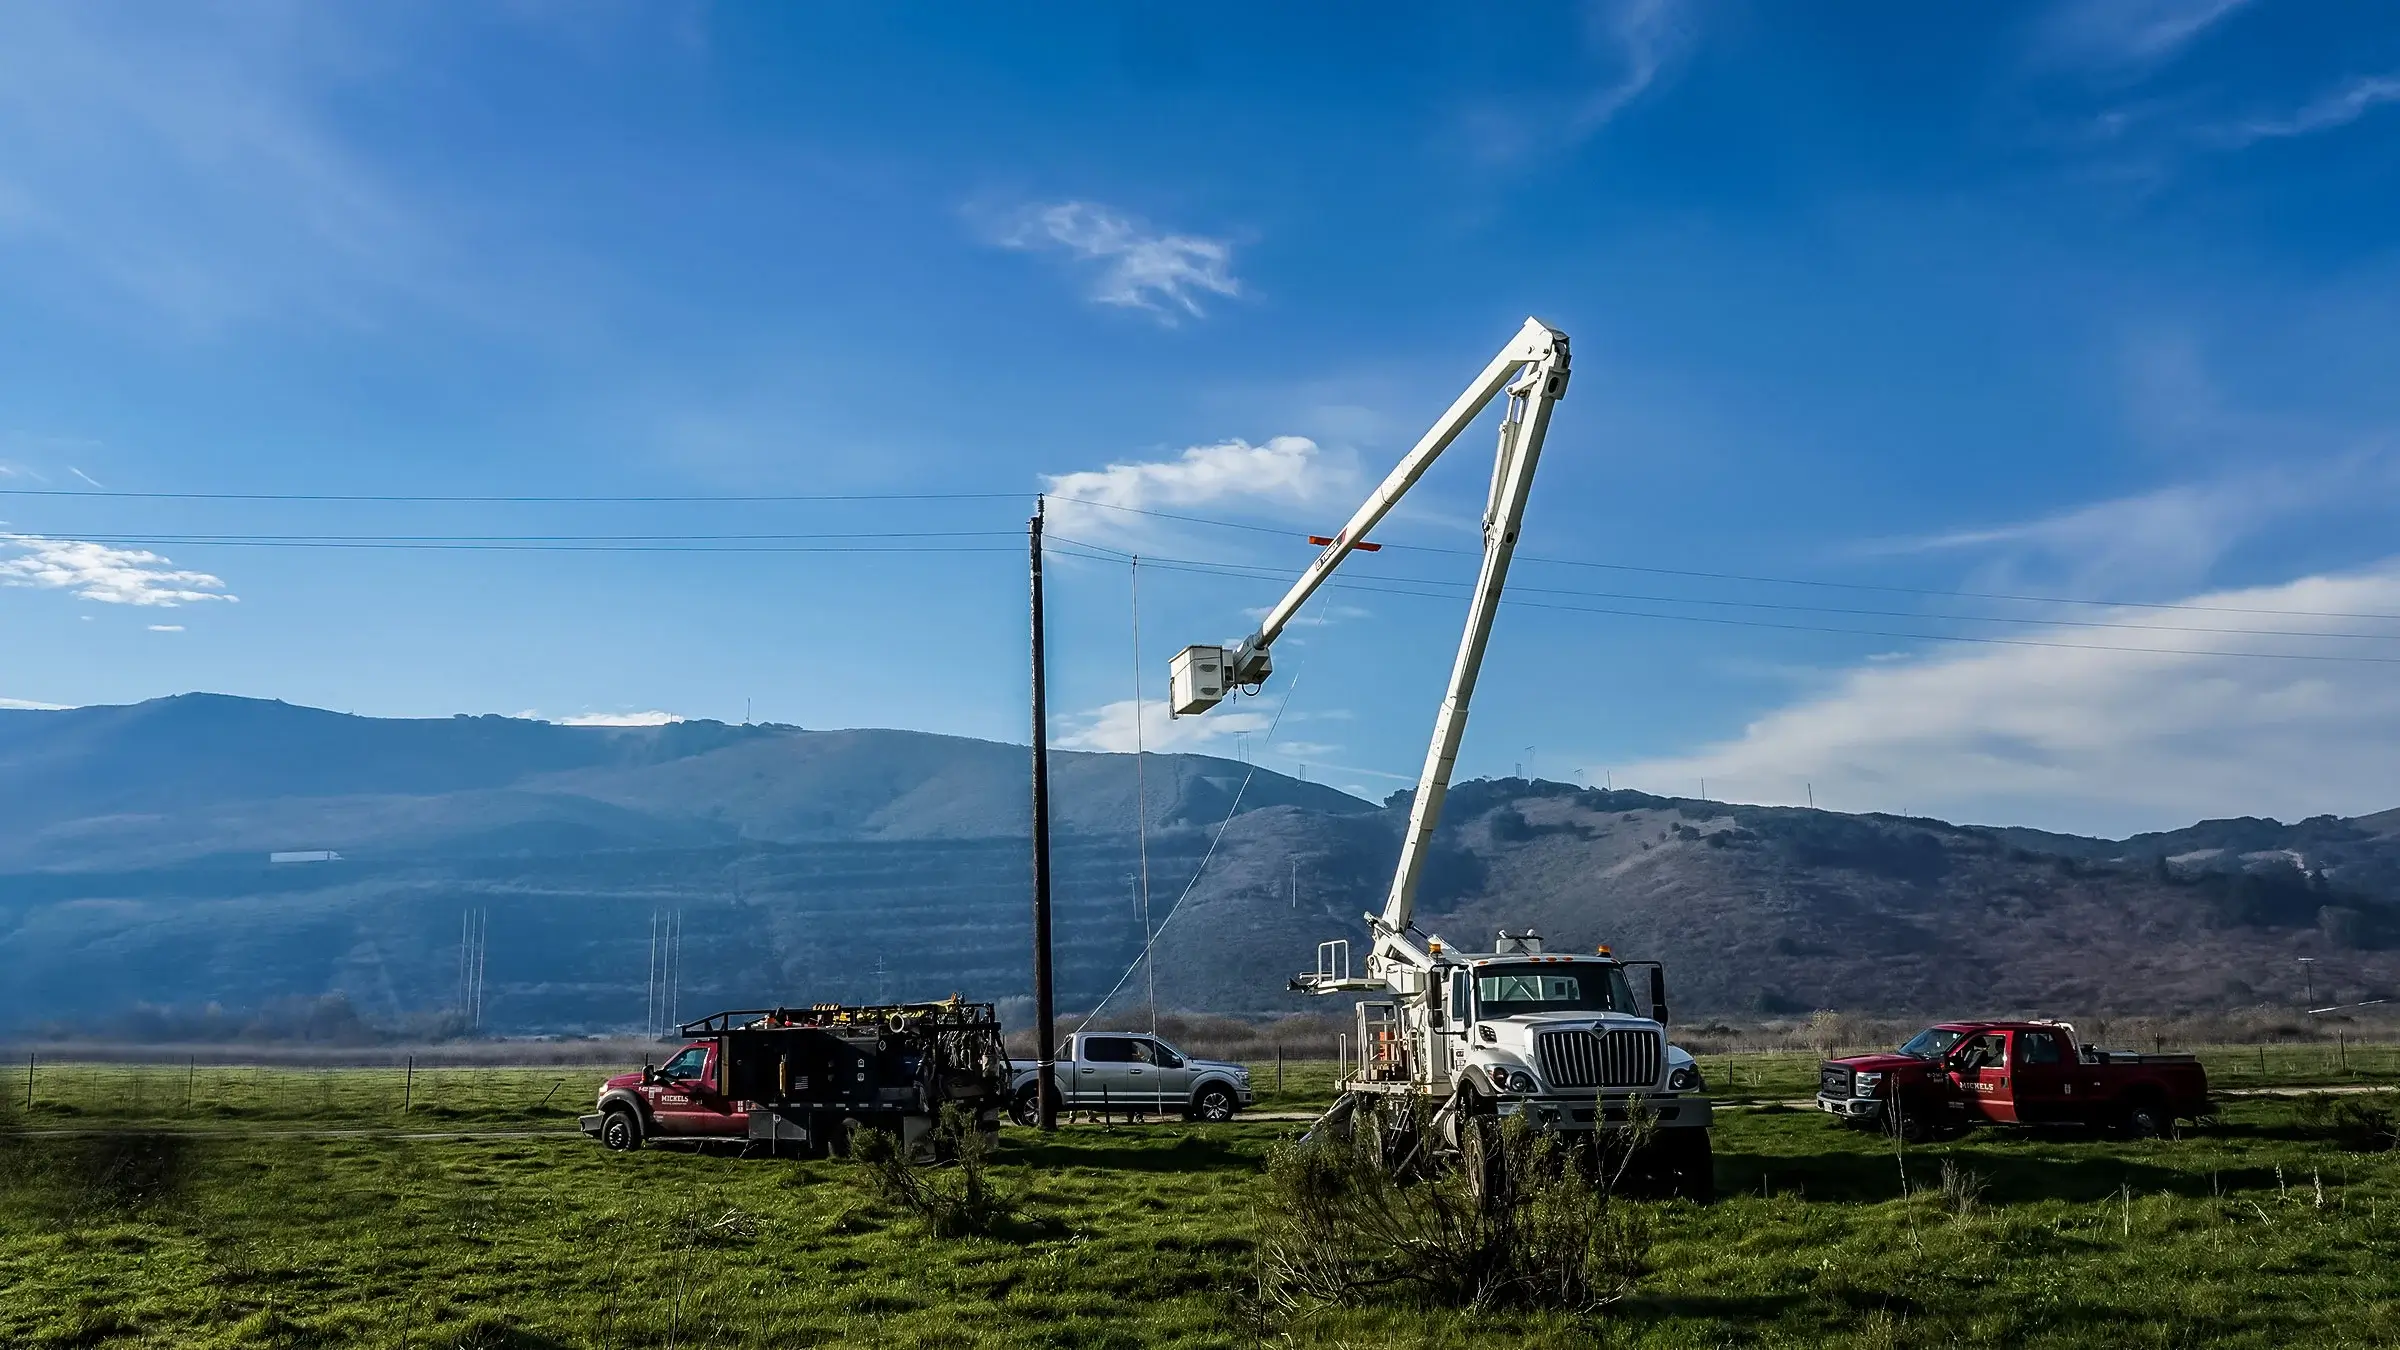 Power crew uses a bucket truck to work on power lines next to a grassy hillside.